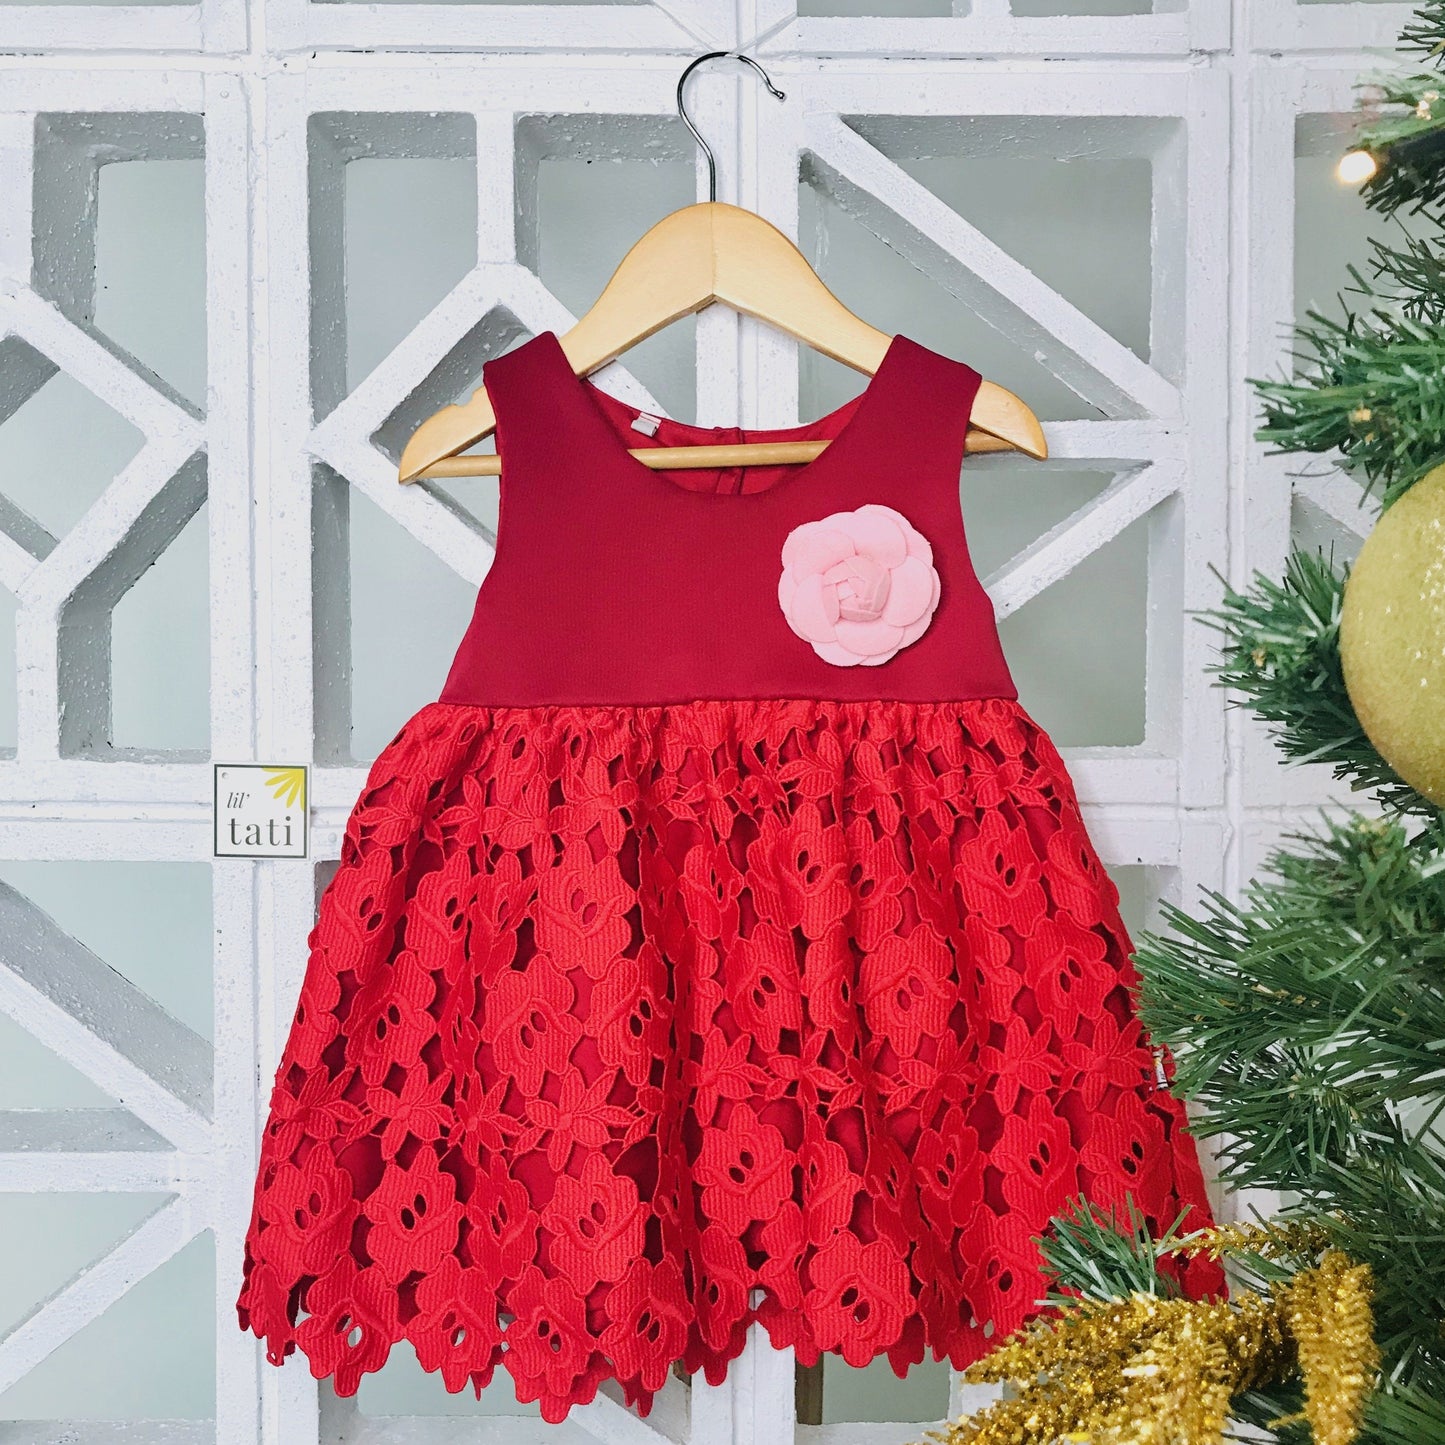 Iris Dress in Red Neoprene and Floral Lace - Lil' Tati